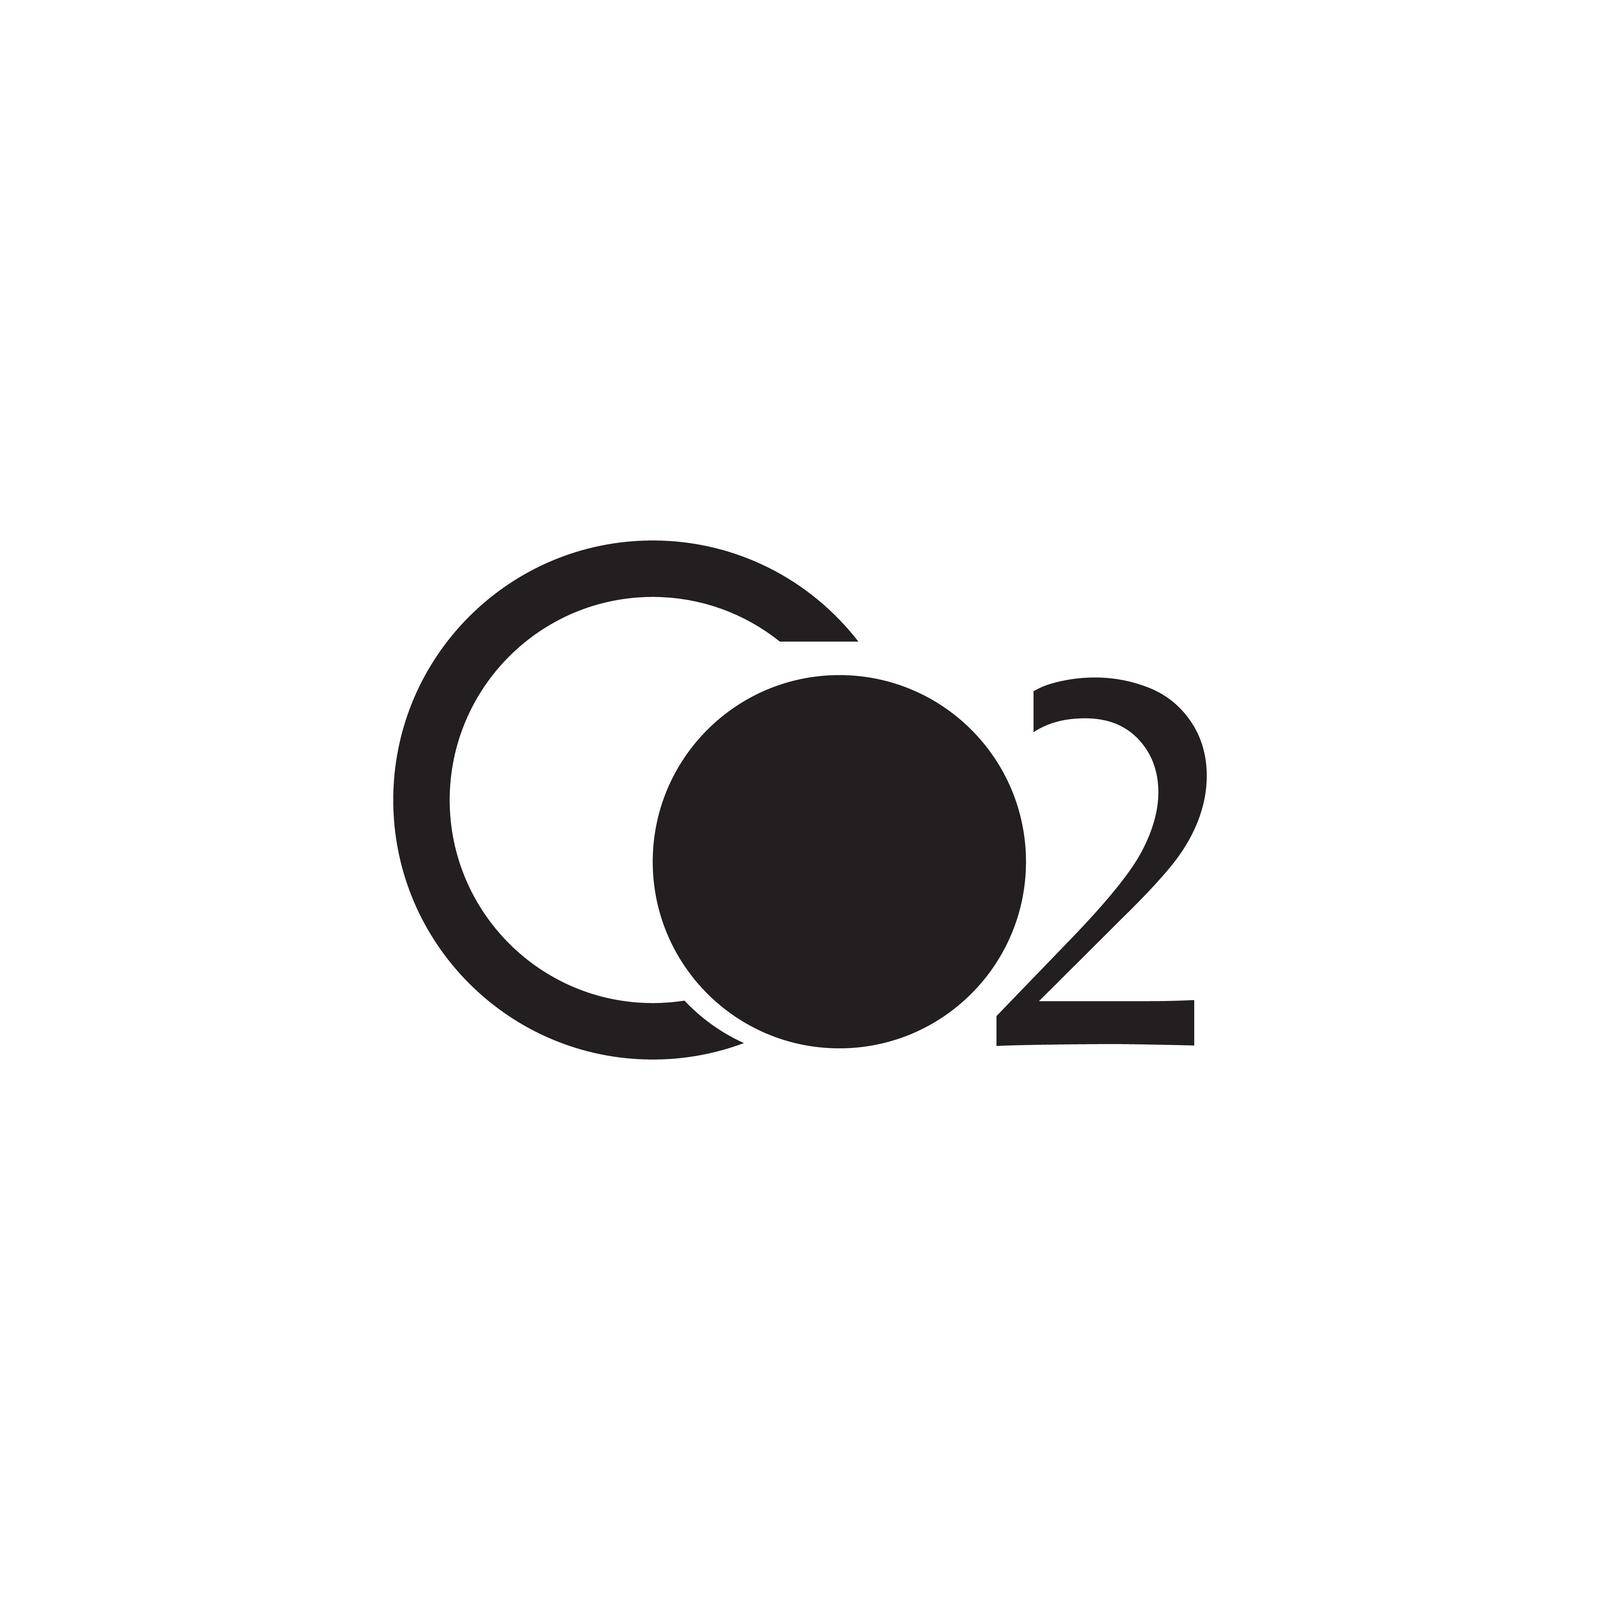 Co2 icon logo vctor  by ABD03